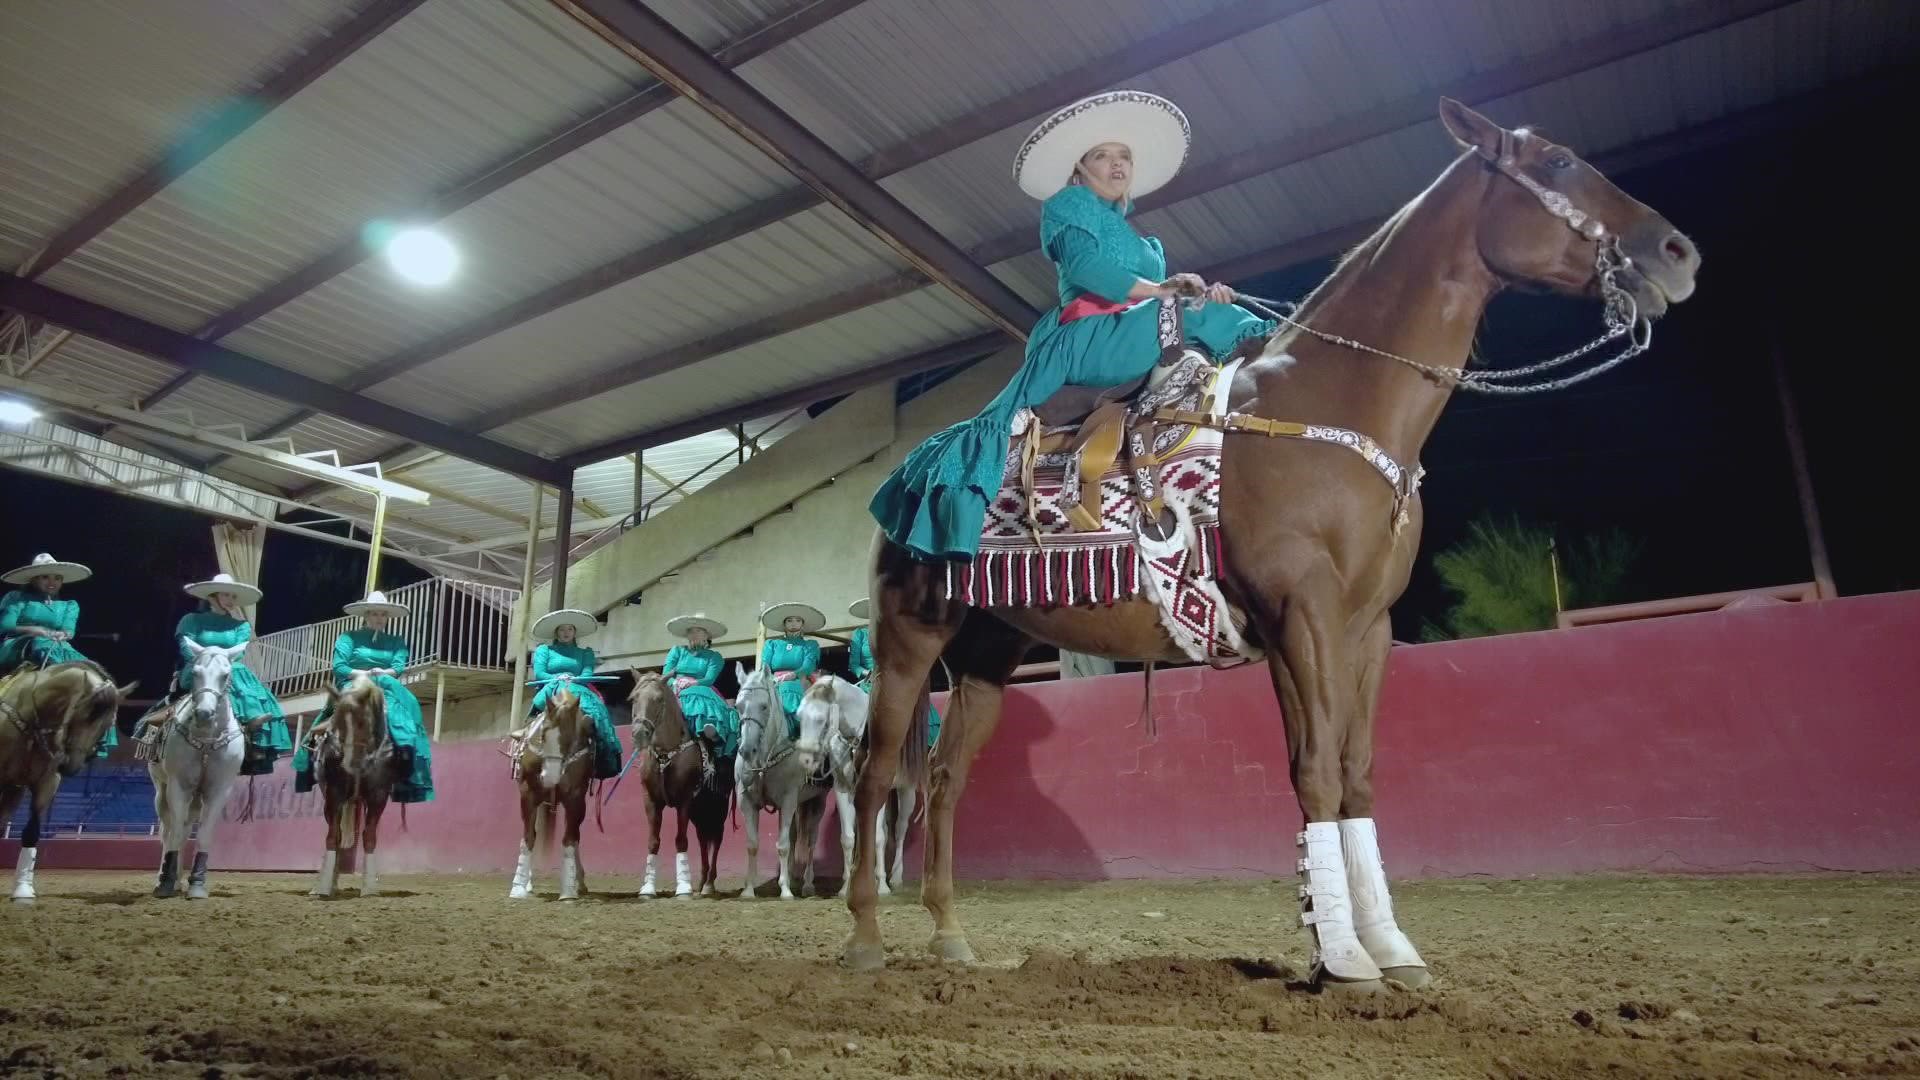 Women who dress as adelitas and perform choreographed tricks with their horses are keeping a 70-year-old Mexican tradition alive in Phoenix.